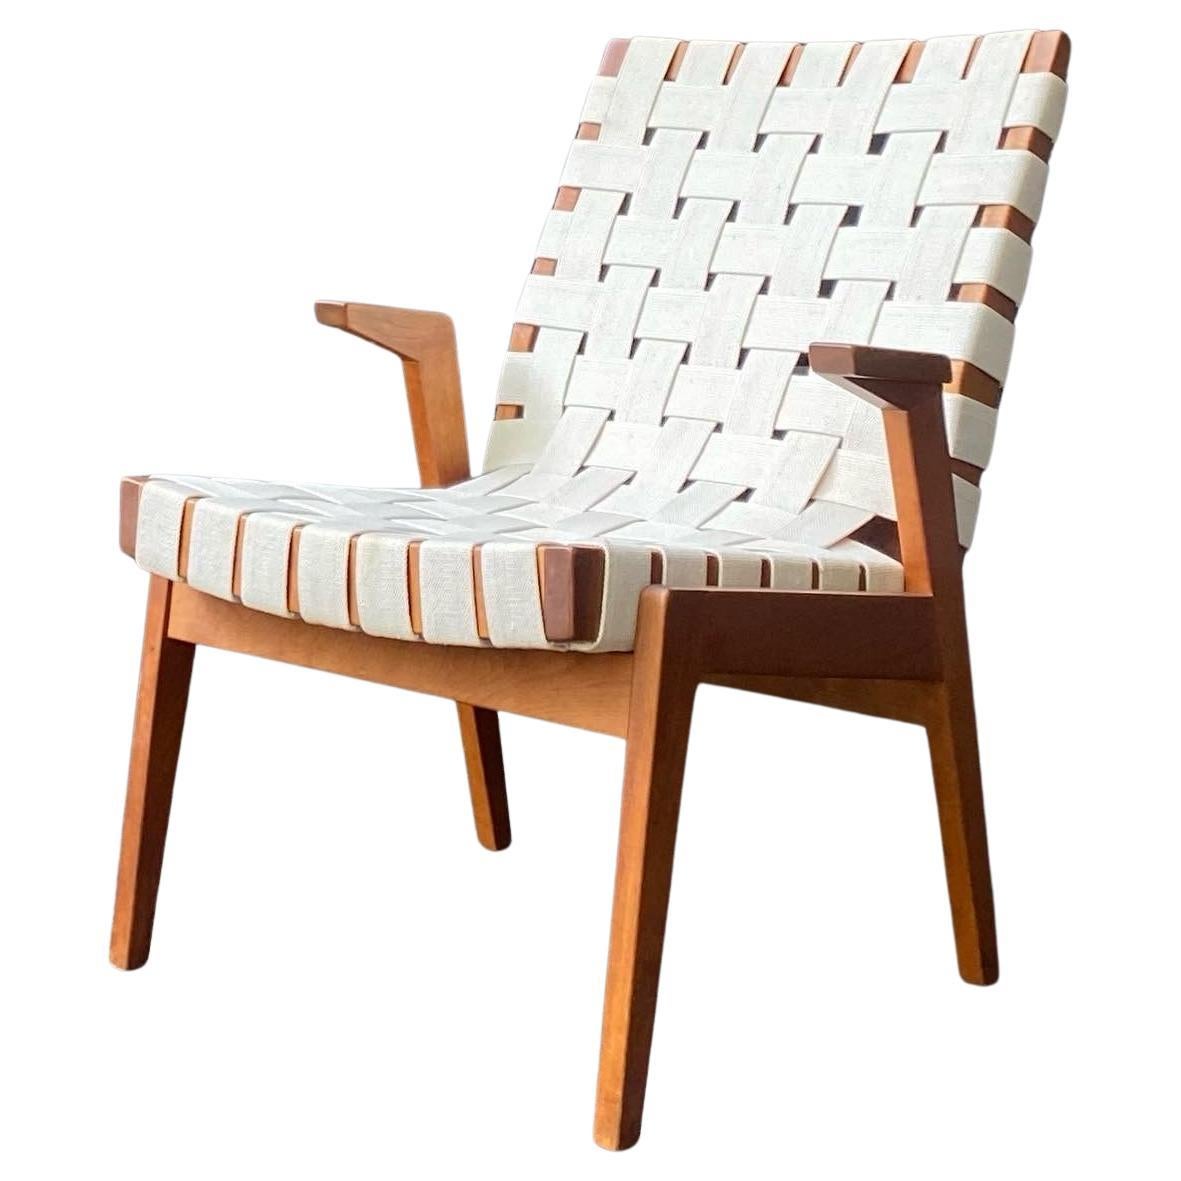 Arden Riddle Studio Craft Solid Cherry Lounge Chair with White Webbing, ca. 1970